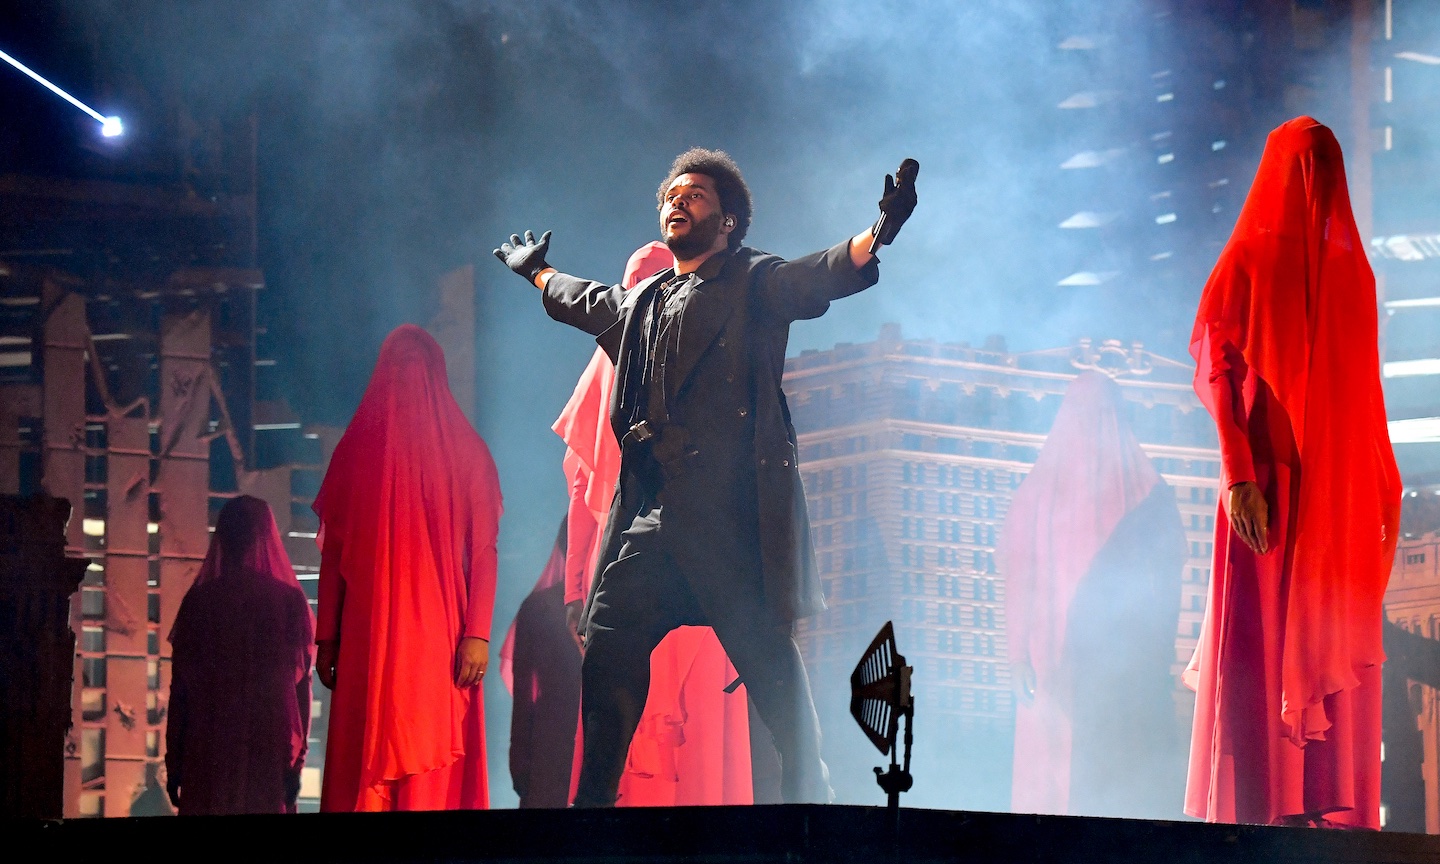 The Weeknd's 'Live At SoFi Stadium' To Be Released As Live Album